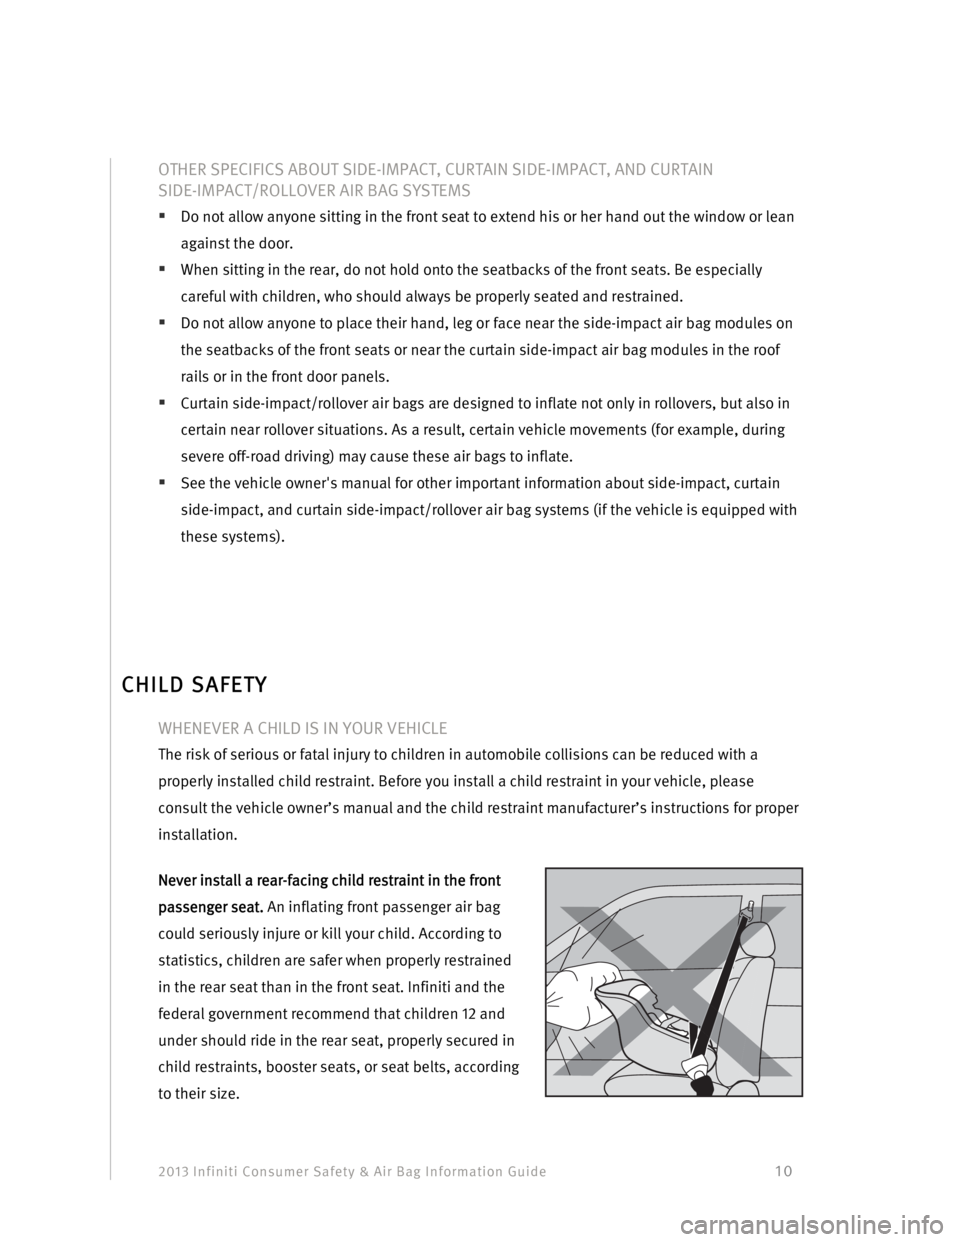 INFINITI JX 2013  Consumer Safety And Air Bag Information Guide 2013 Infiniti Consumer Safety & Air Bag Information Guide                                         10 
OTHER SPECIFICS ABOUT SIDE-IMPACT, CURTAIN SIDE-IMPACT, AND CURTAIN  
SIDE-IMPACT/ROLLOVER AIR BAG